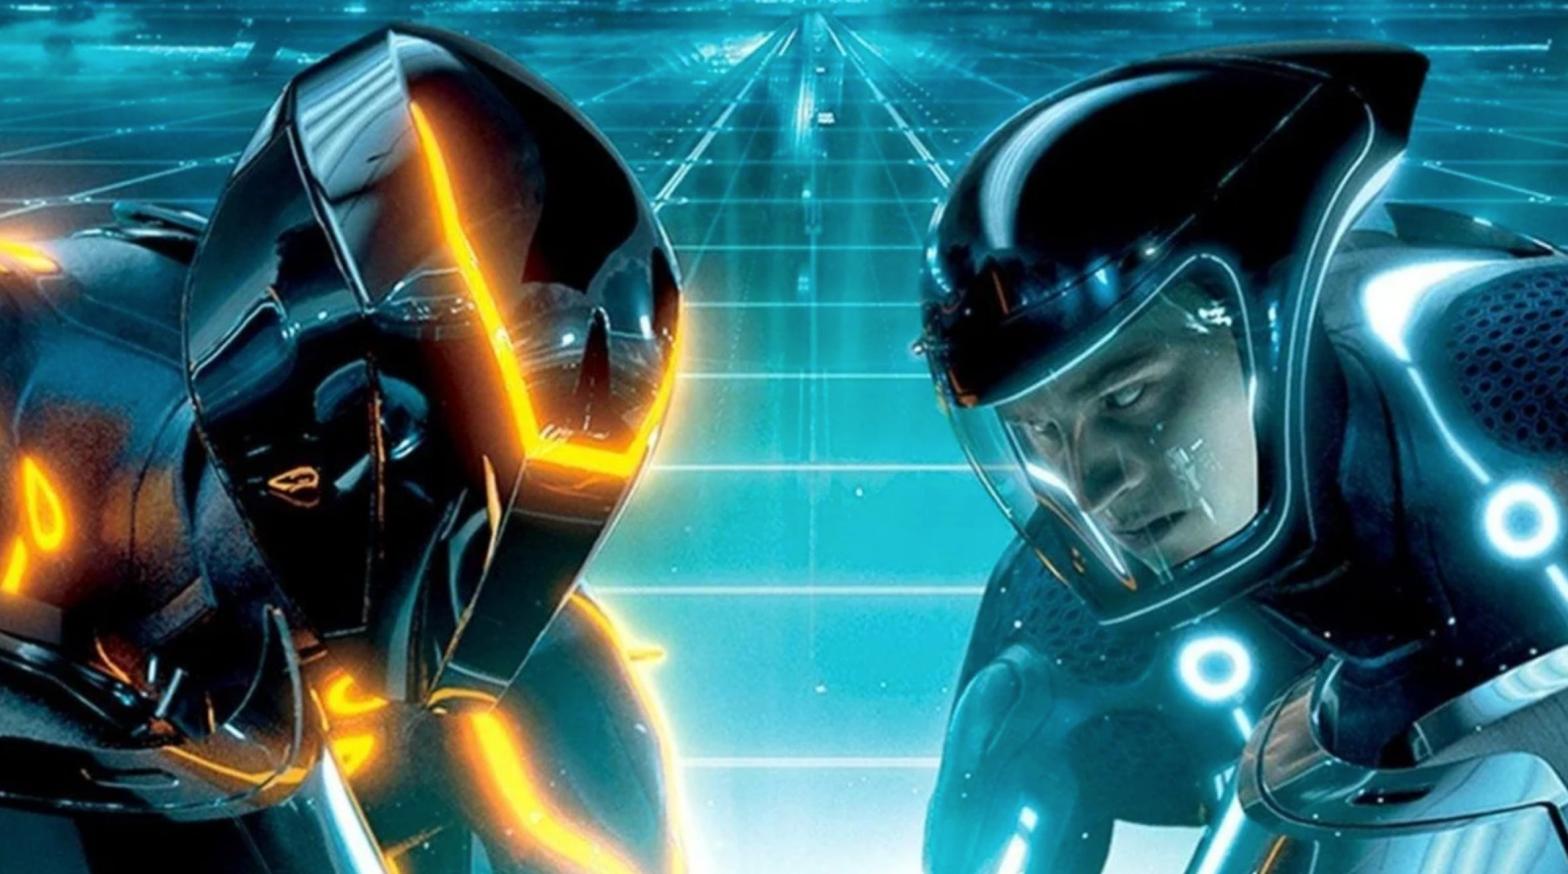 A Tron Legacy sequel may actually be coming. (Image: Disney)